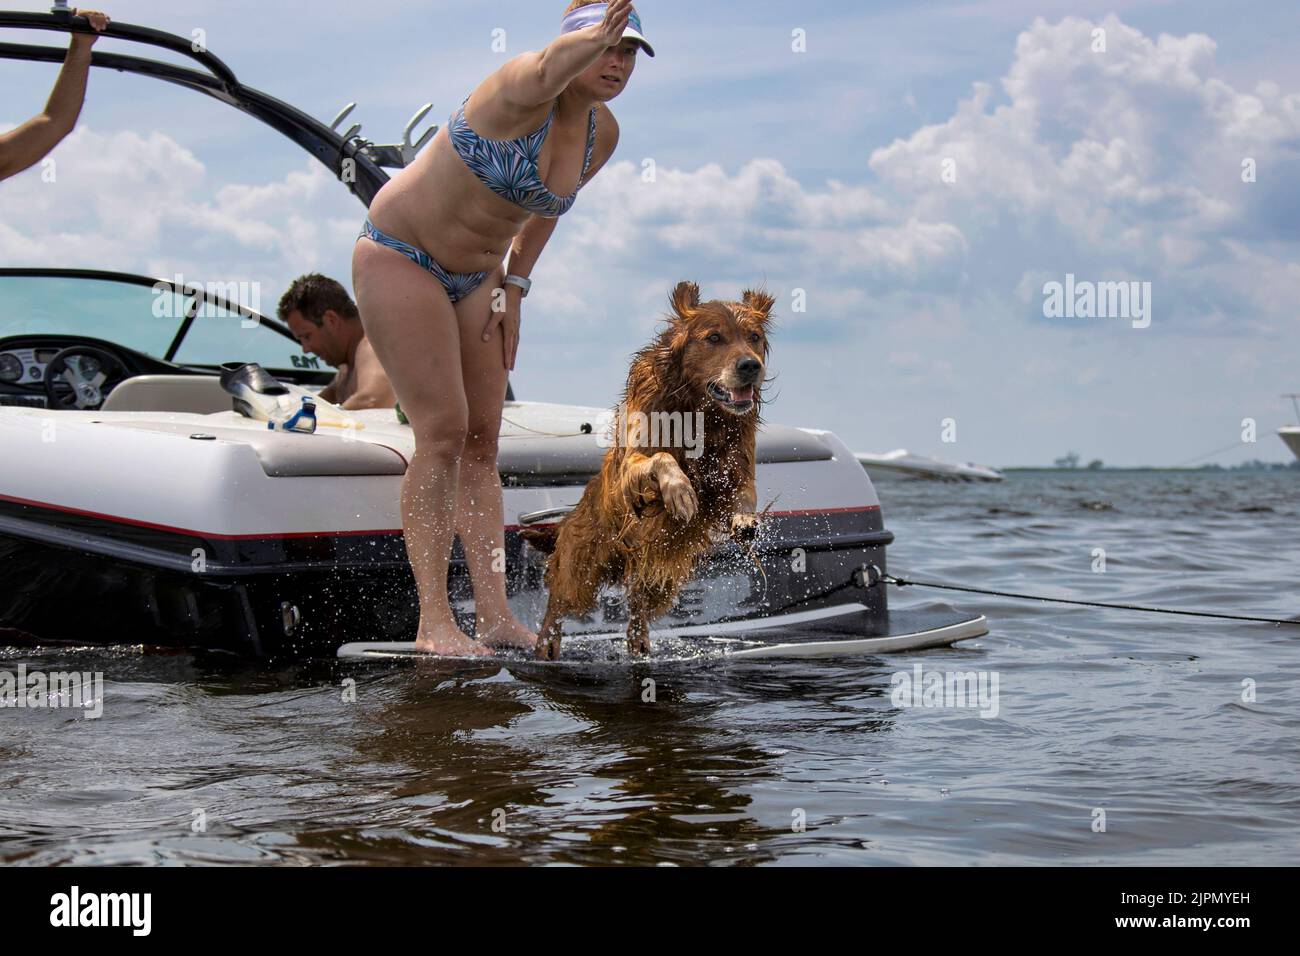 A woman training a golden retriever dog to jump into the water. Stock Photo